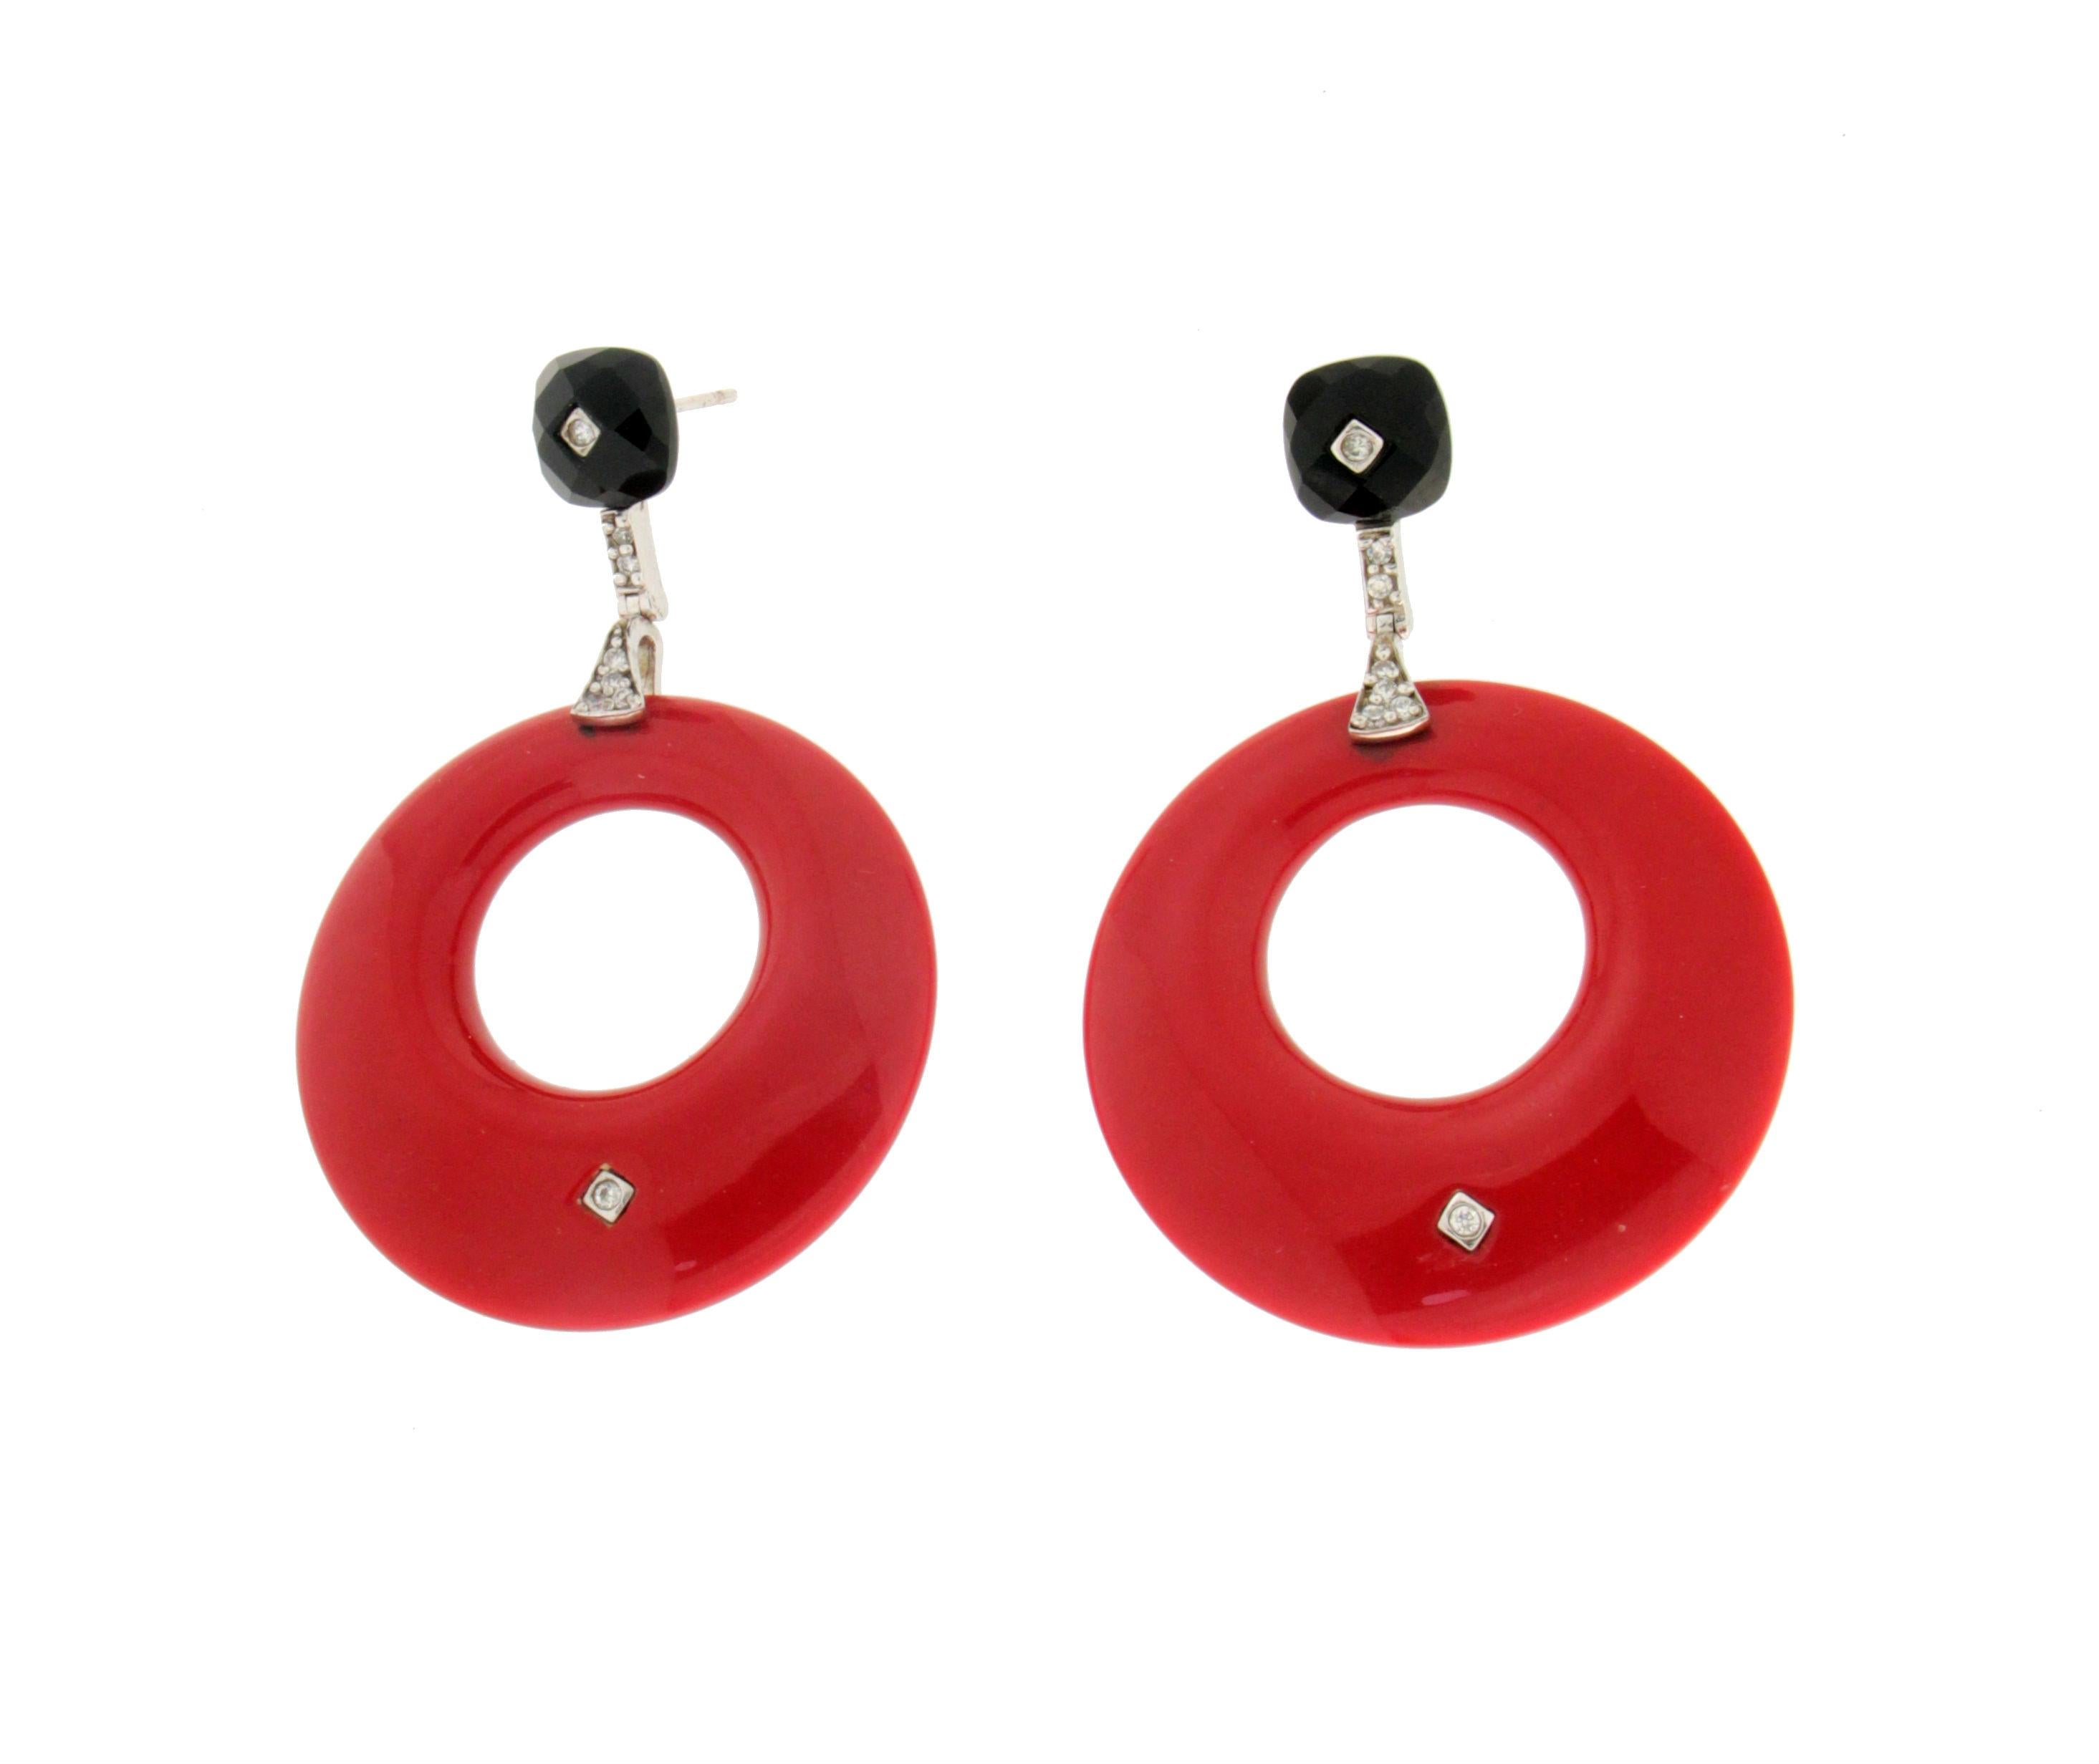 925 karat silver drop earrings. Handmade by our artisans assembled with red hard stones,onyx and cubic zirconia

Earrings total weight 15.40 grams